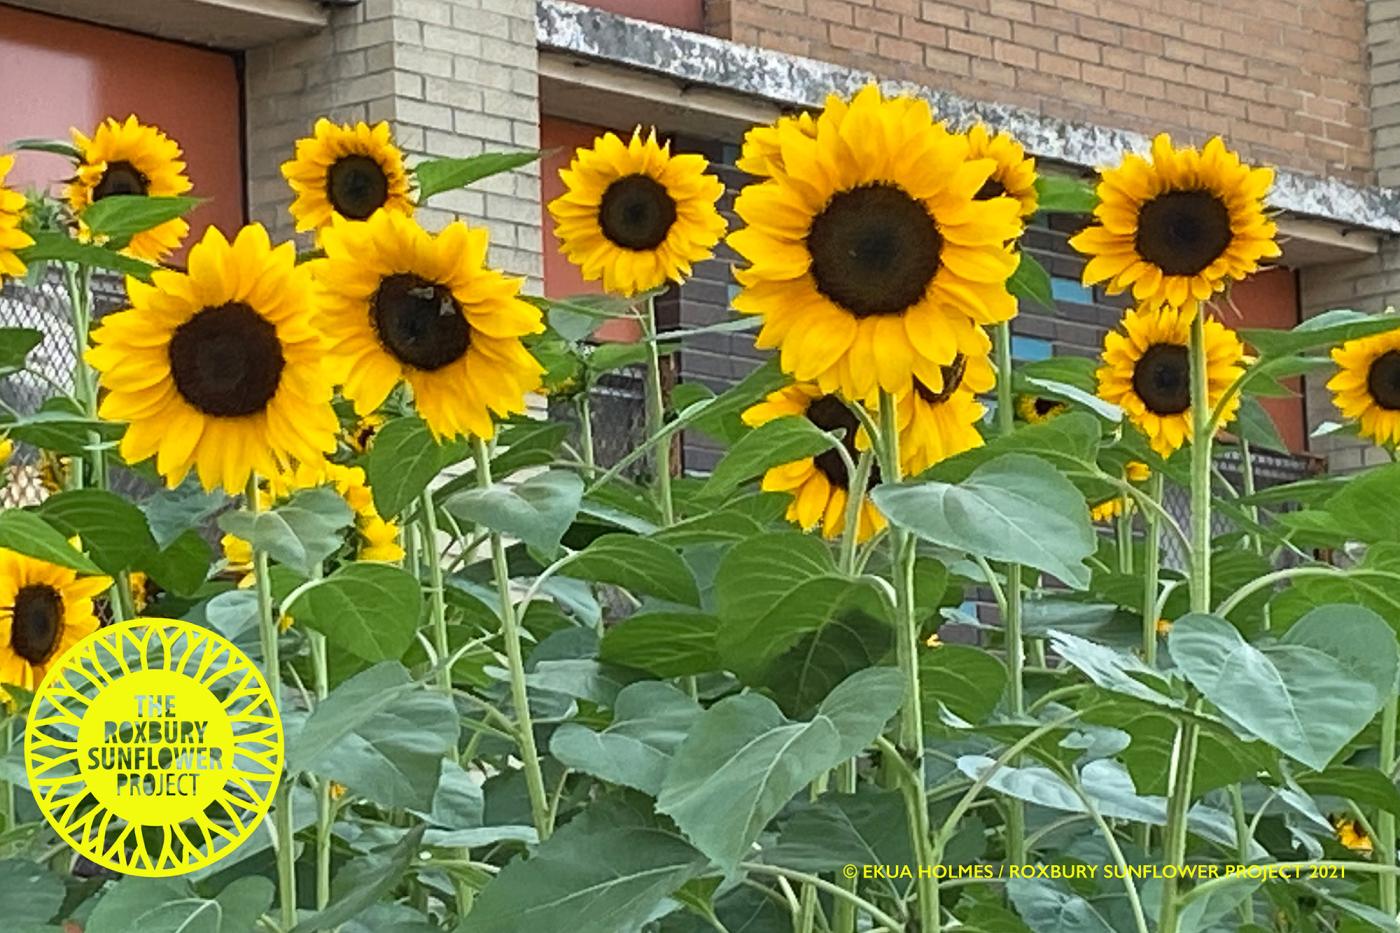 Outside, in front of a brick building, sunflowers are in bloom.